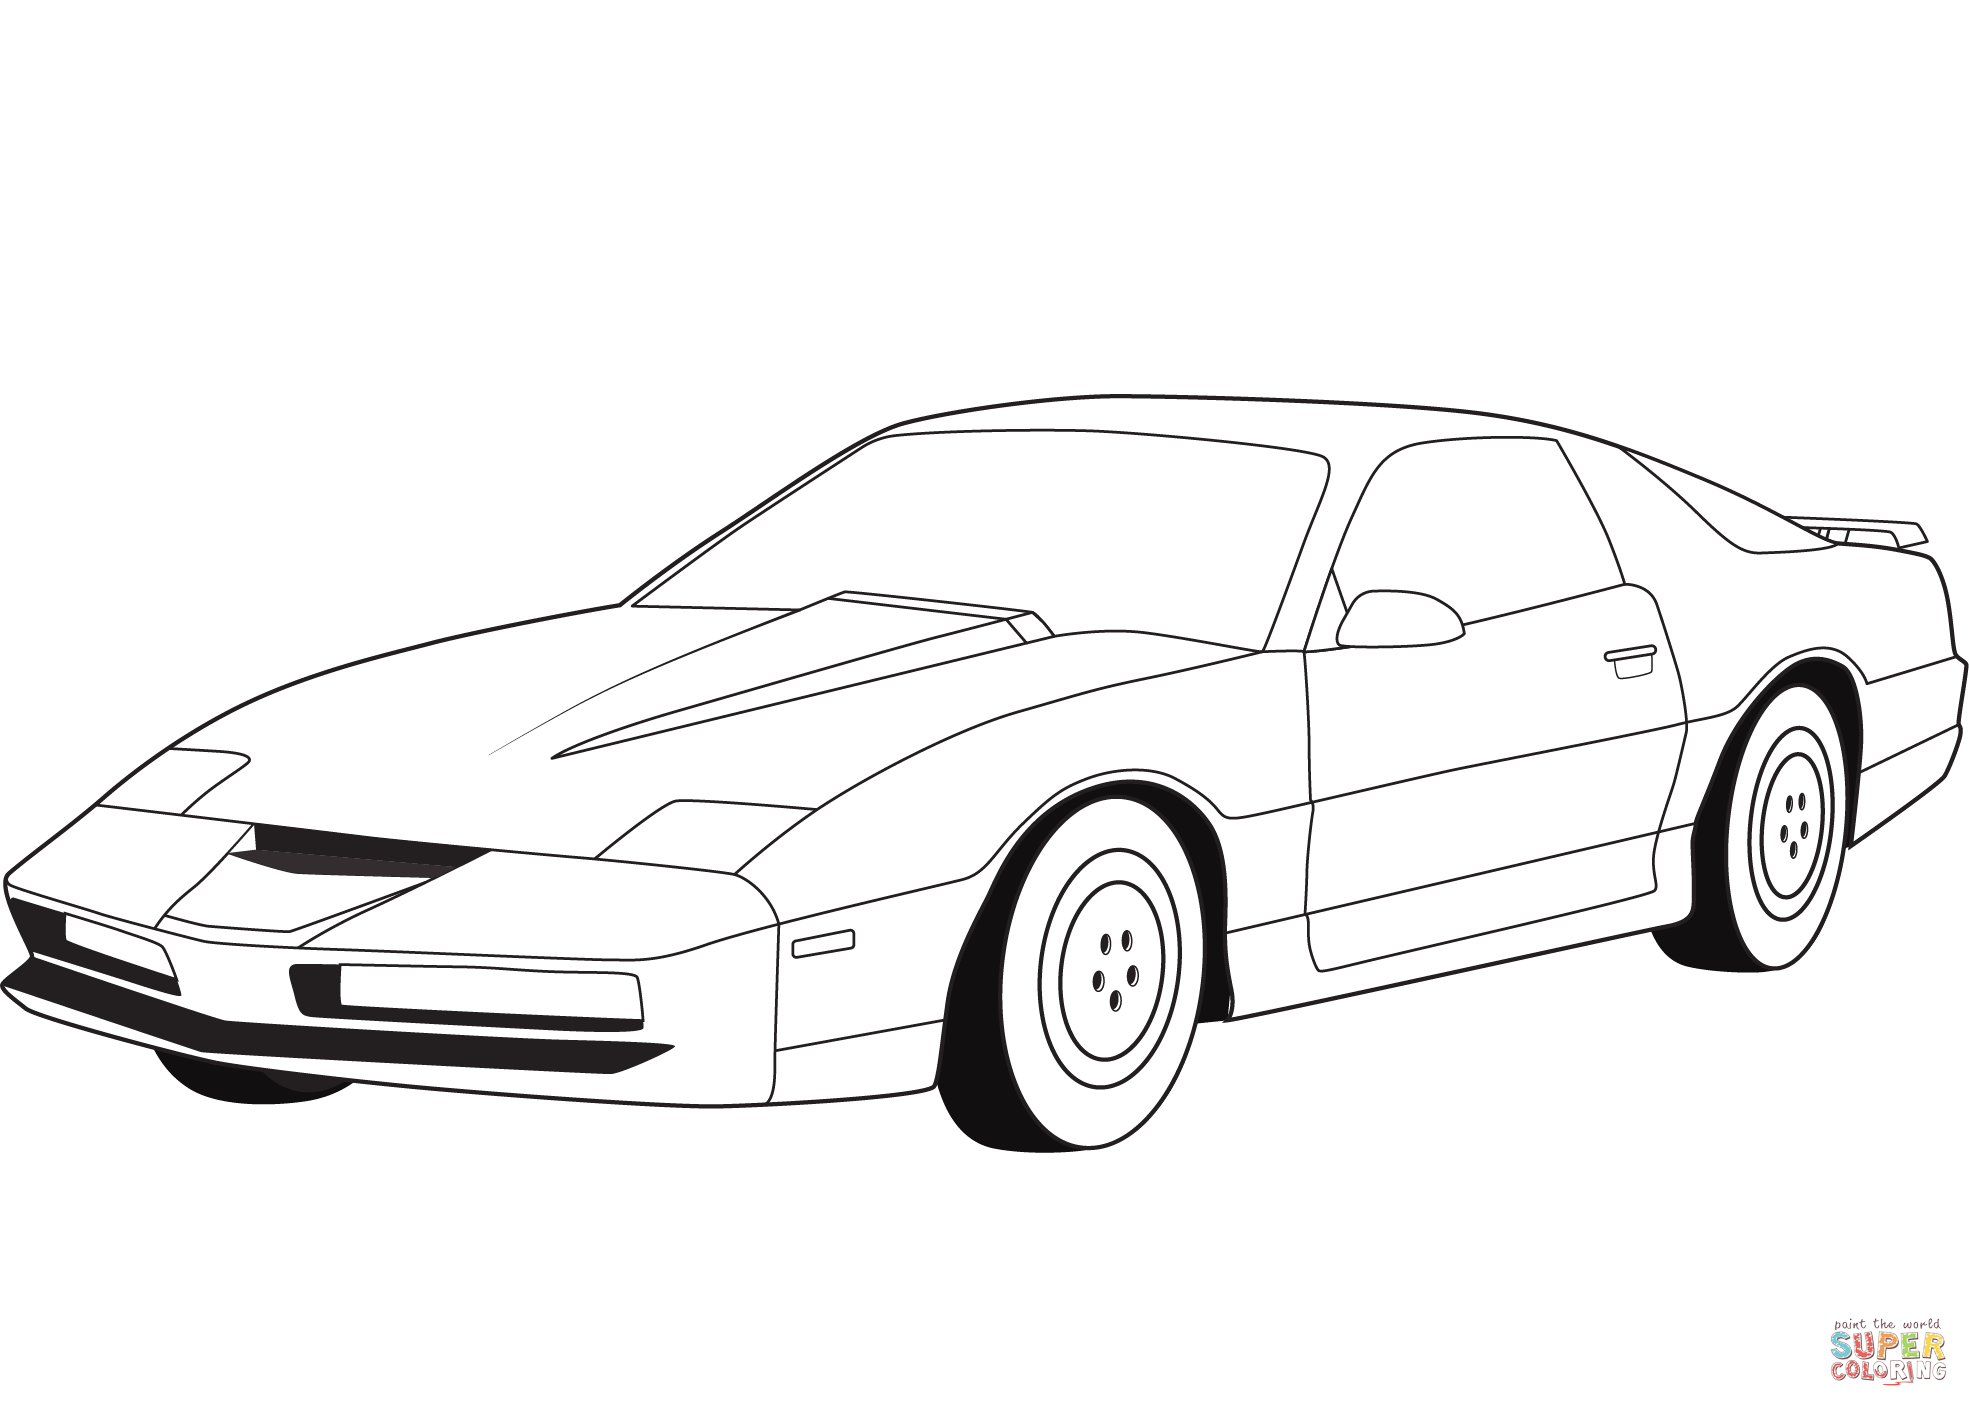 Knight industries two thousand kitt coloring page free printable coloring pages